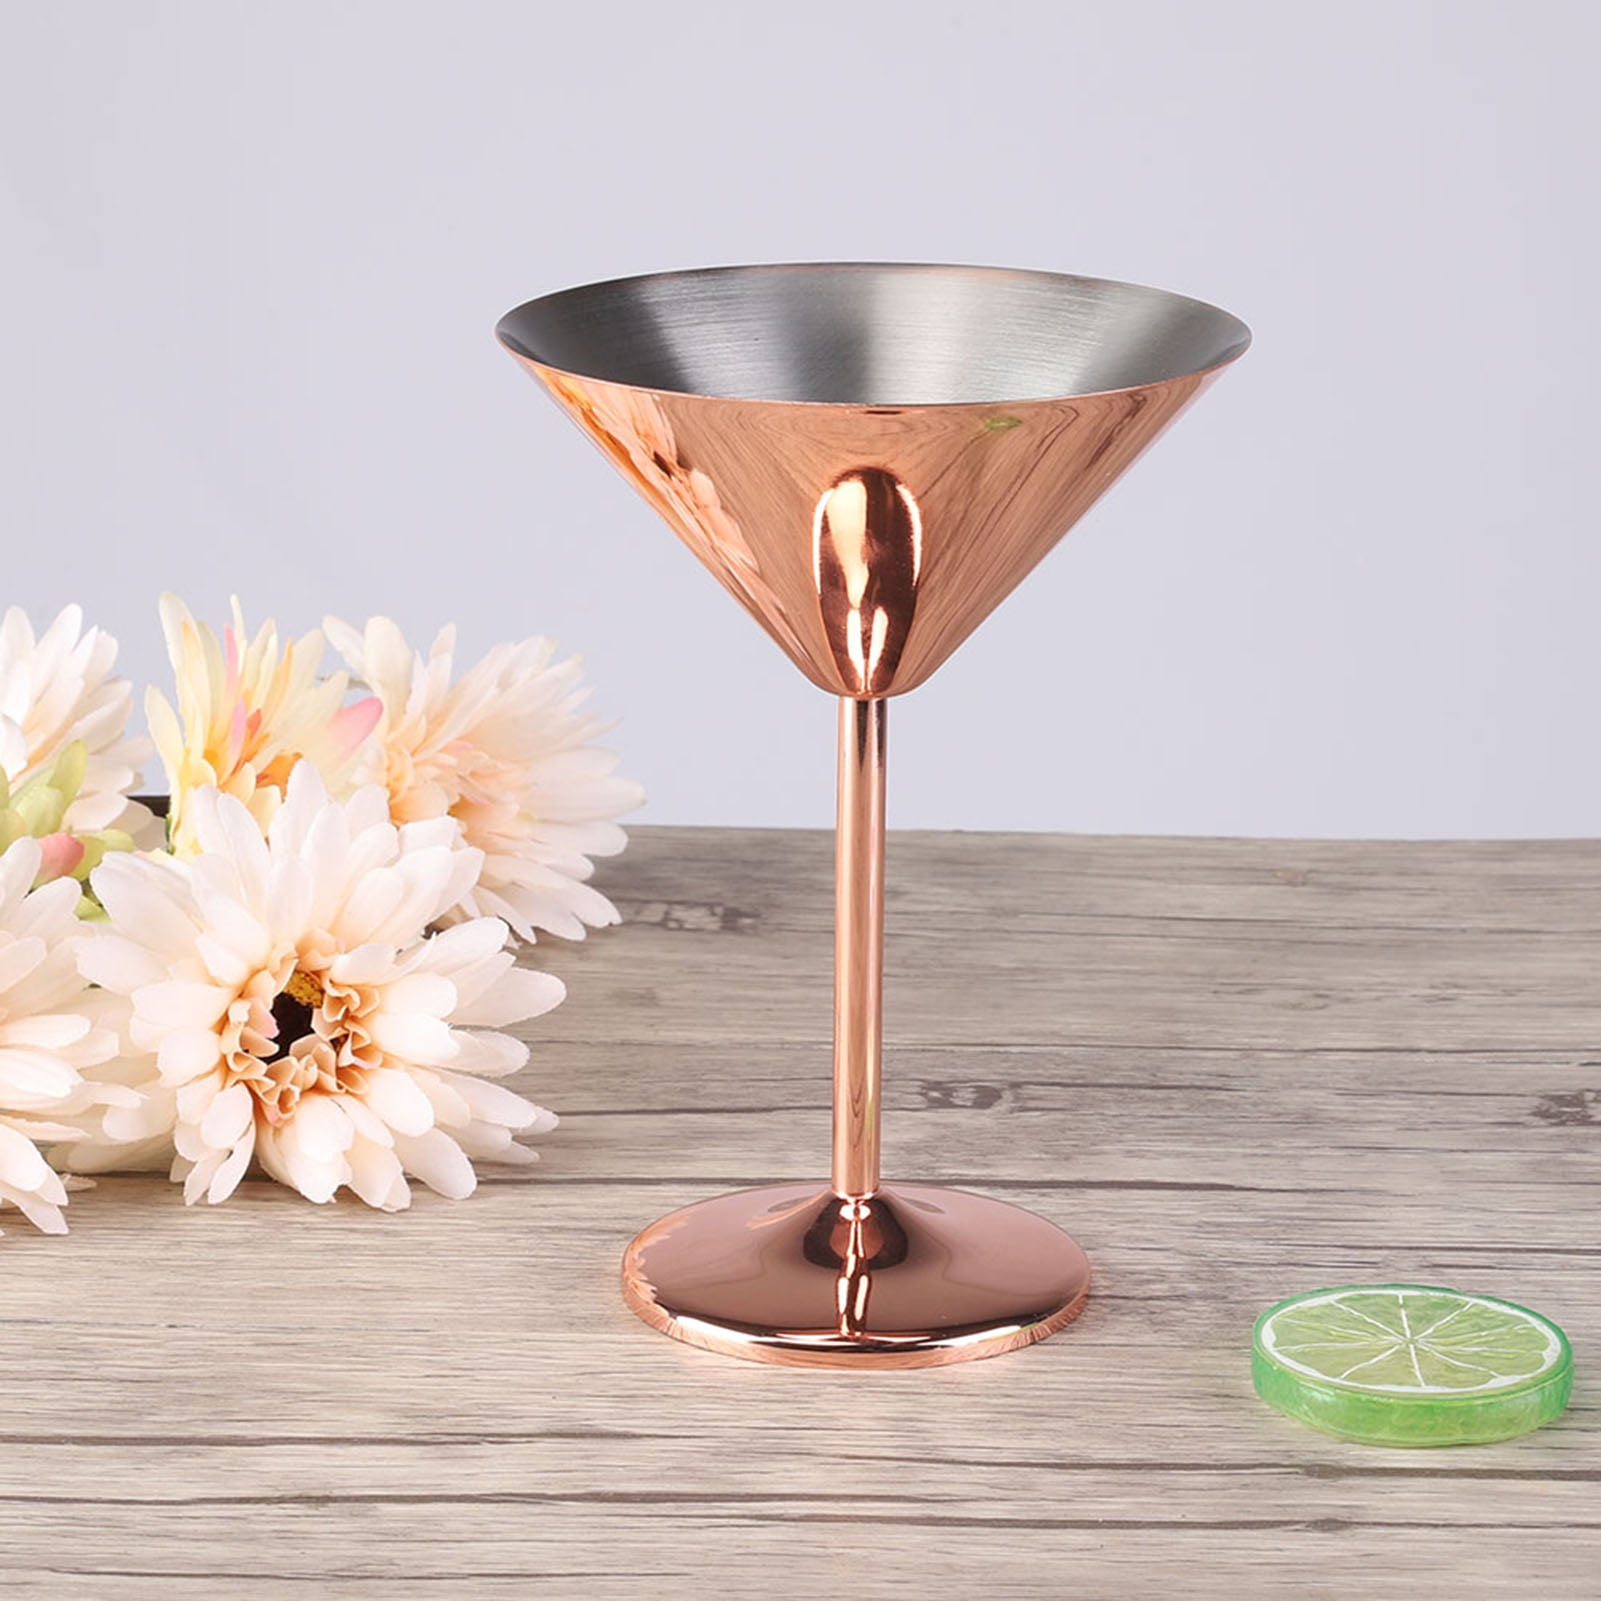 CmengAo Rose Gold Martini Glasses Set of 2, Copper Plated Stainless Steel  Martini Margarita Cocktail Glasses (8oz)